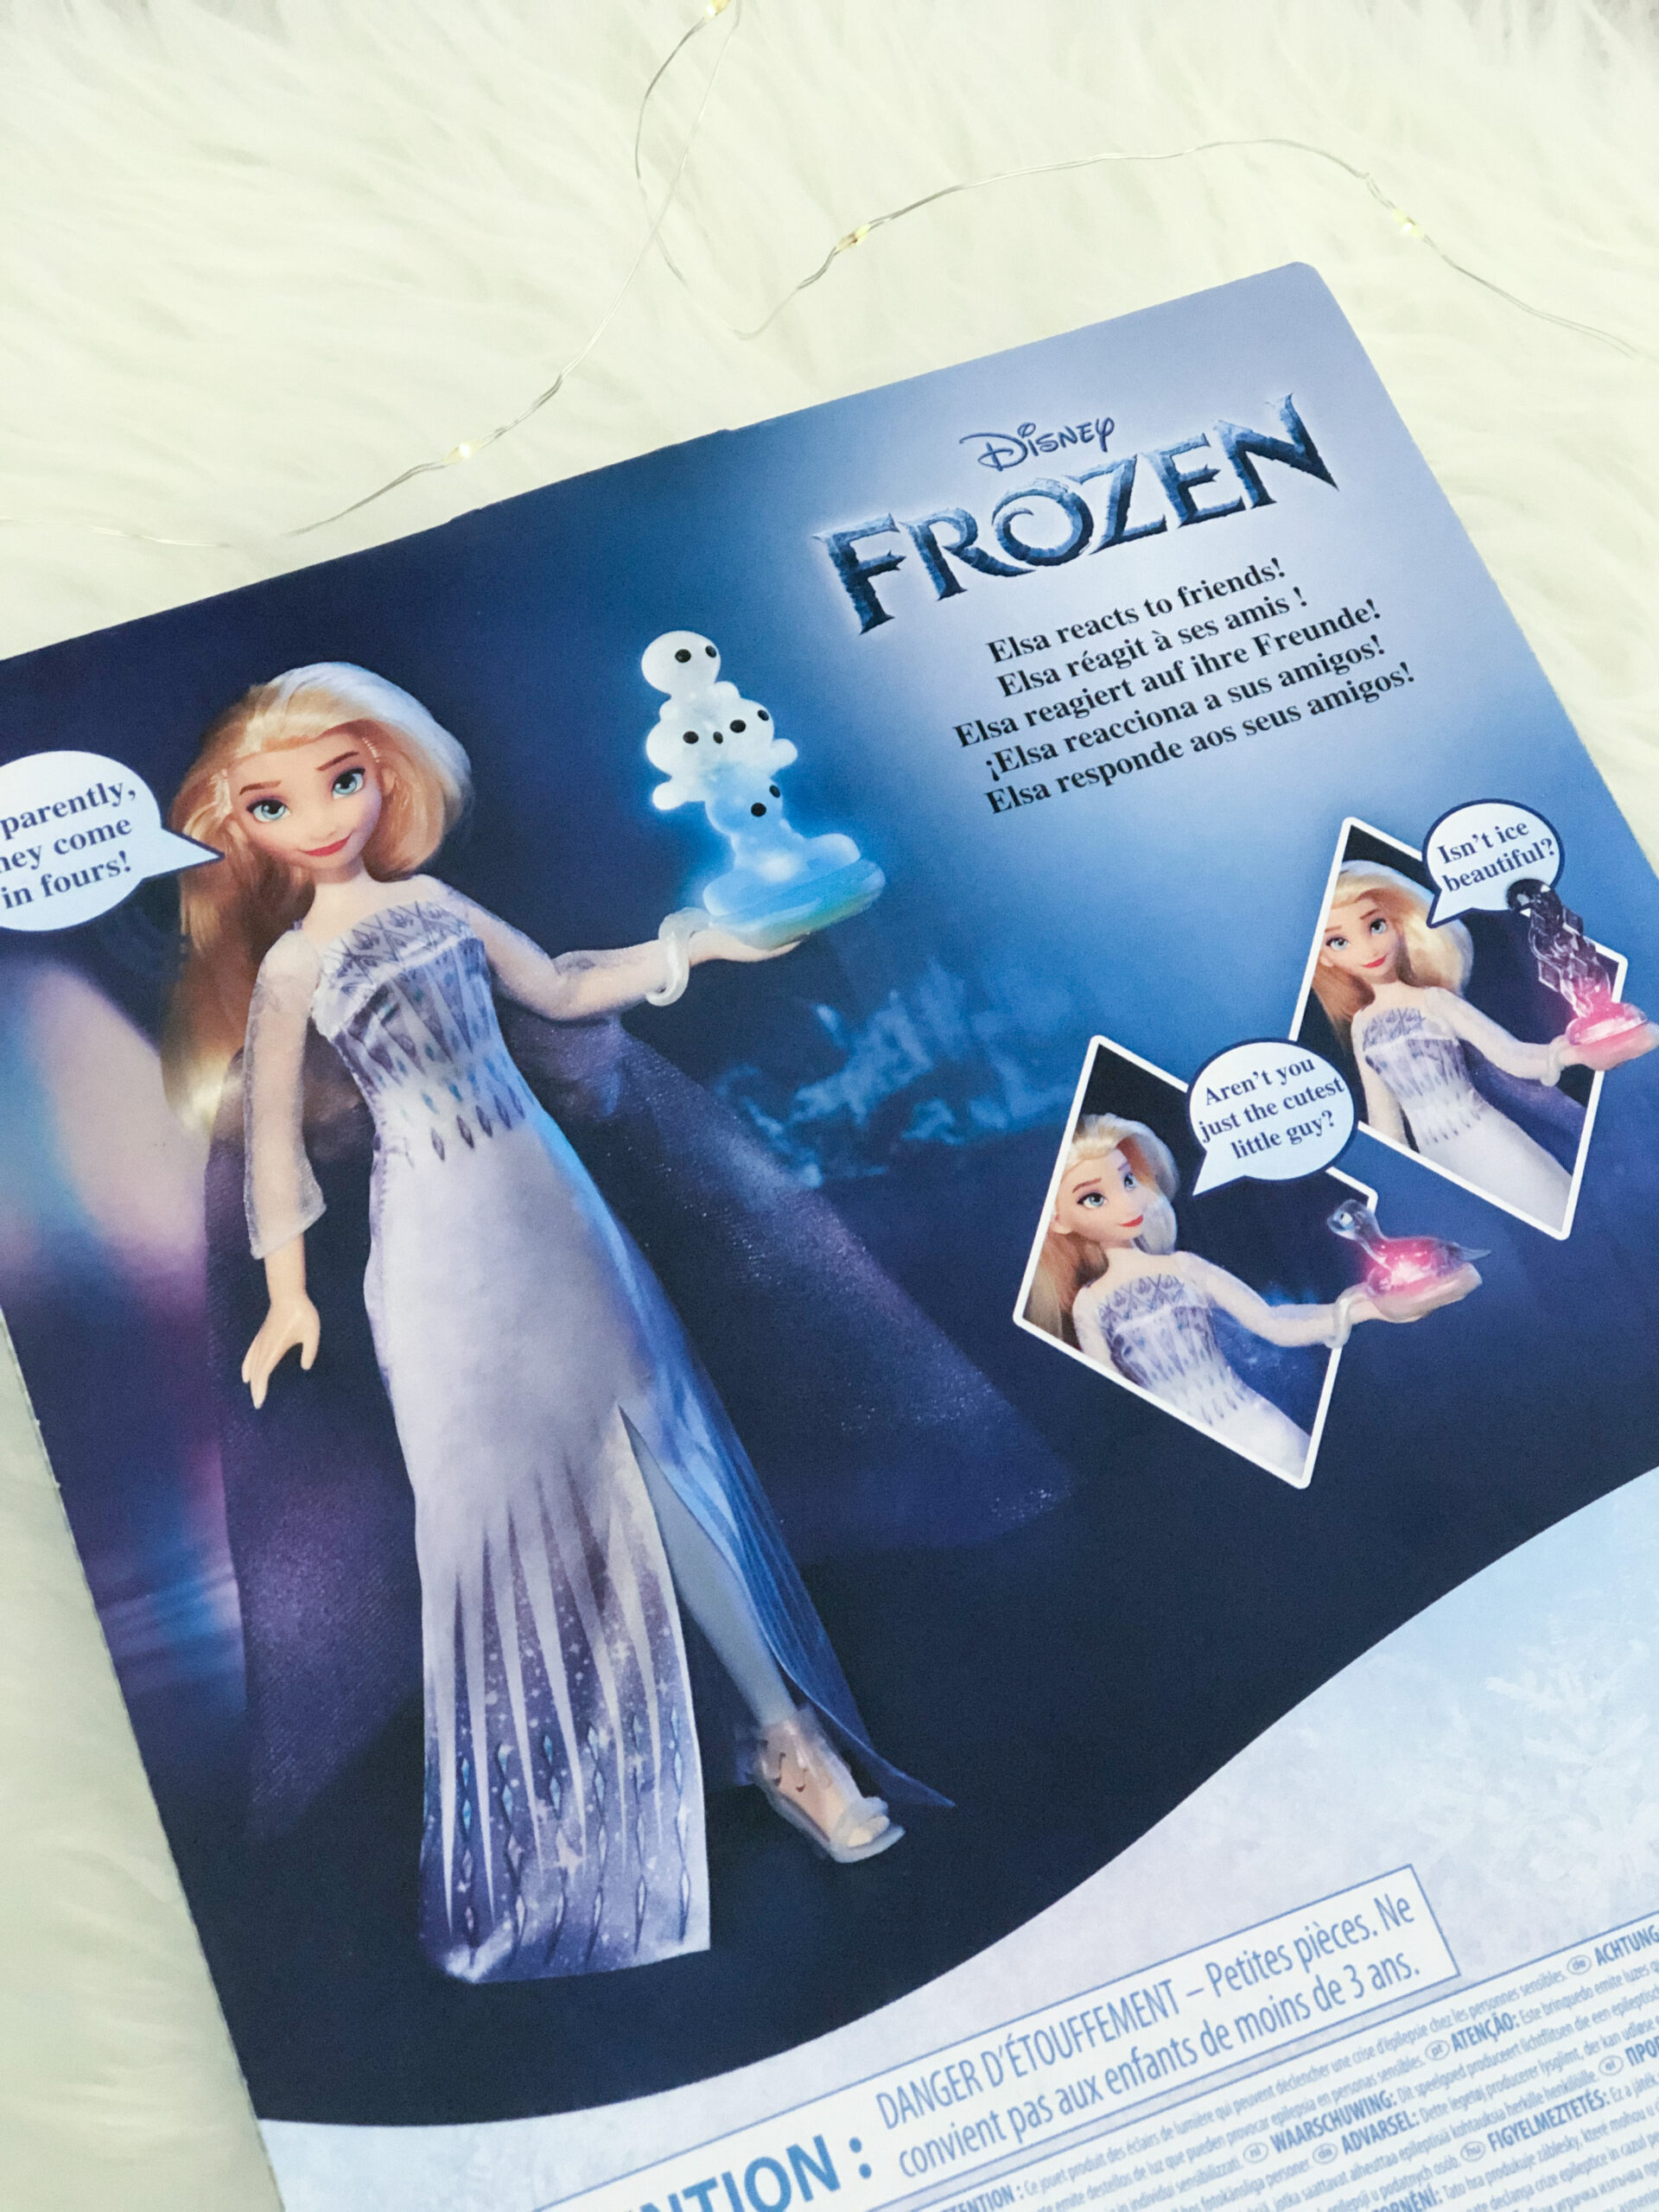 Hasbro Gift Guide for Kids on livin' Life with Style- frozen doll